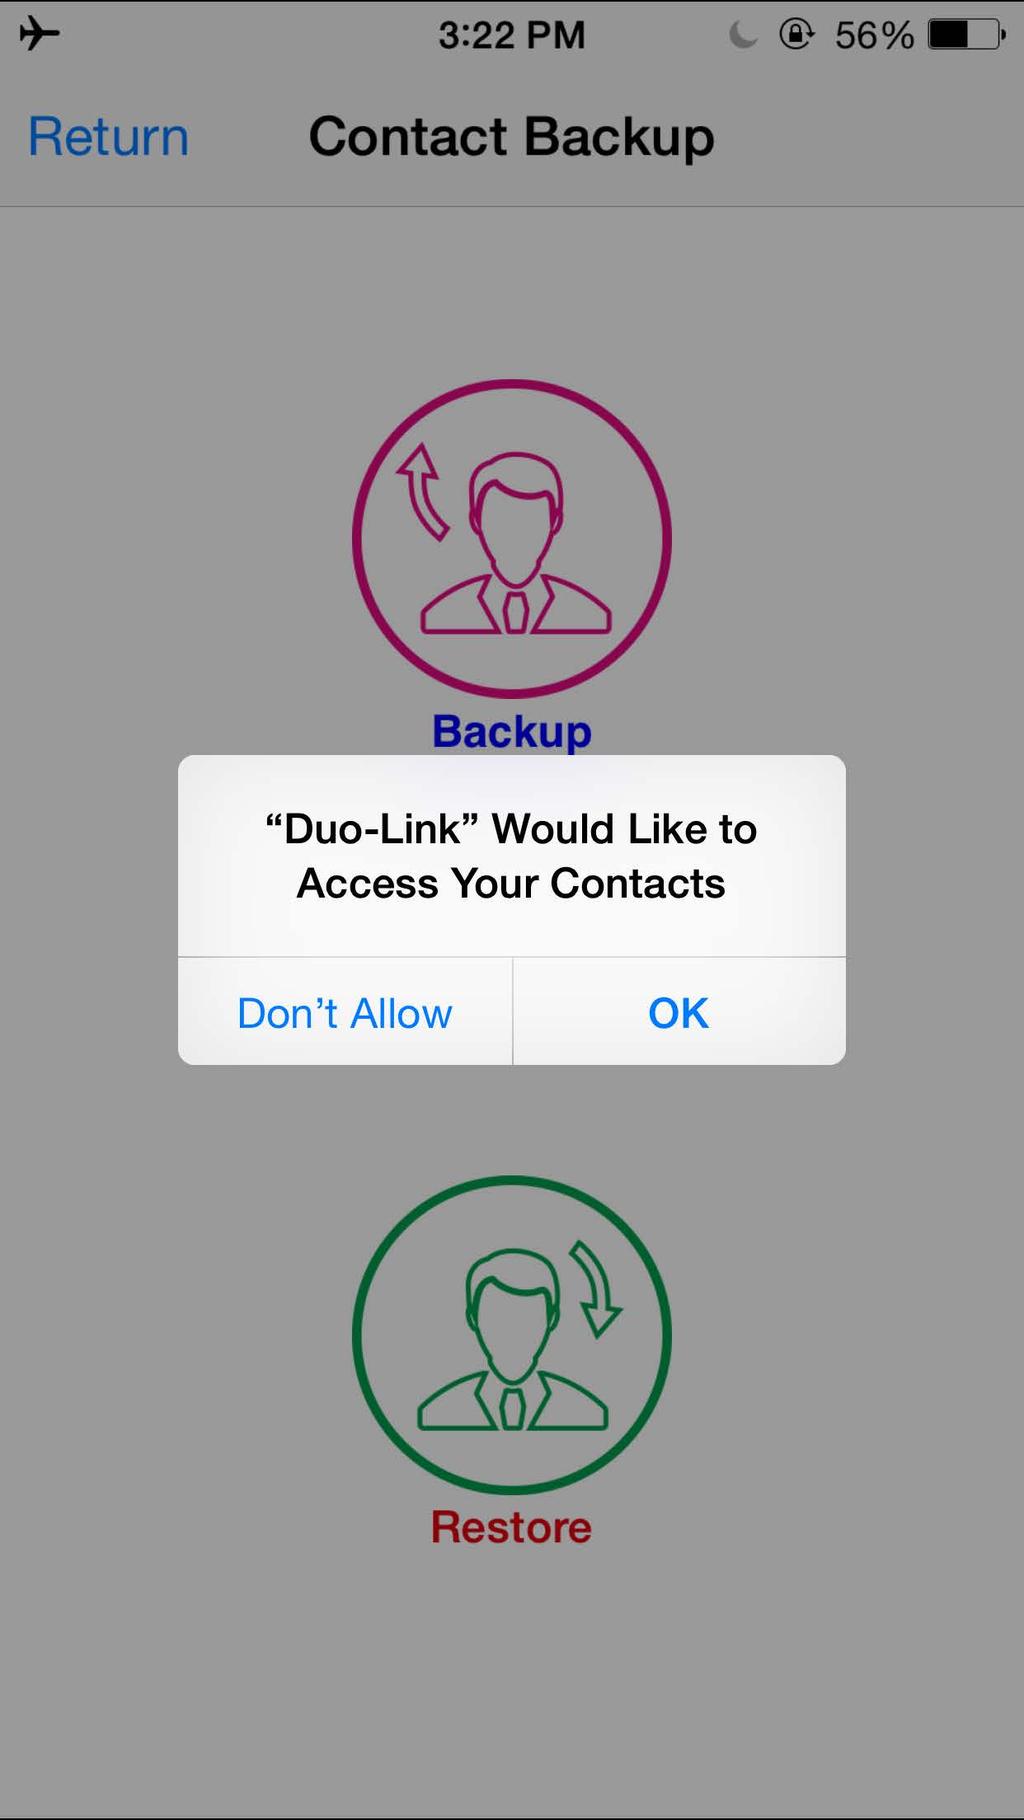 First you need to ensure that the DUO-LINK App has access to your contacts.